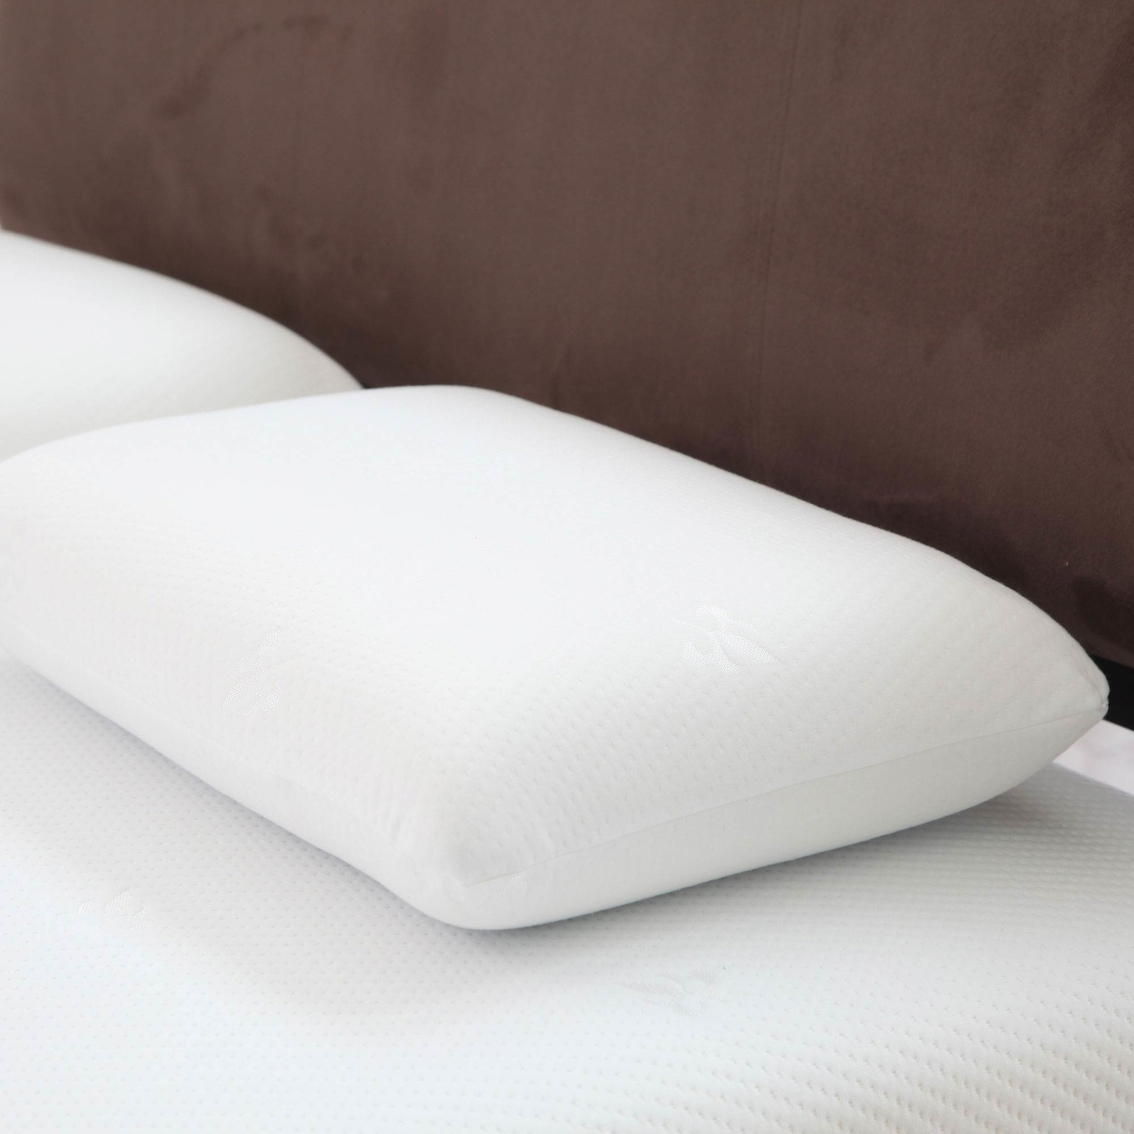 Memory foam pillows are the latest in bed technology